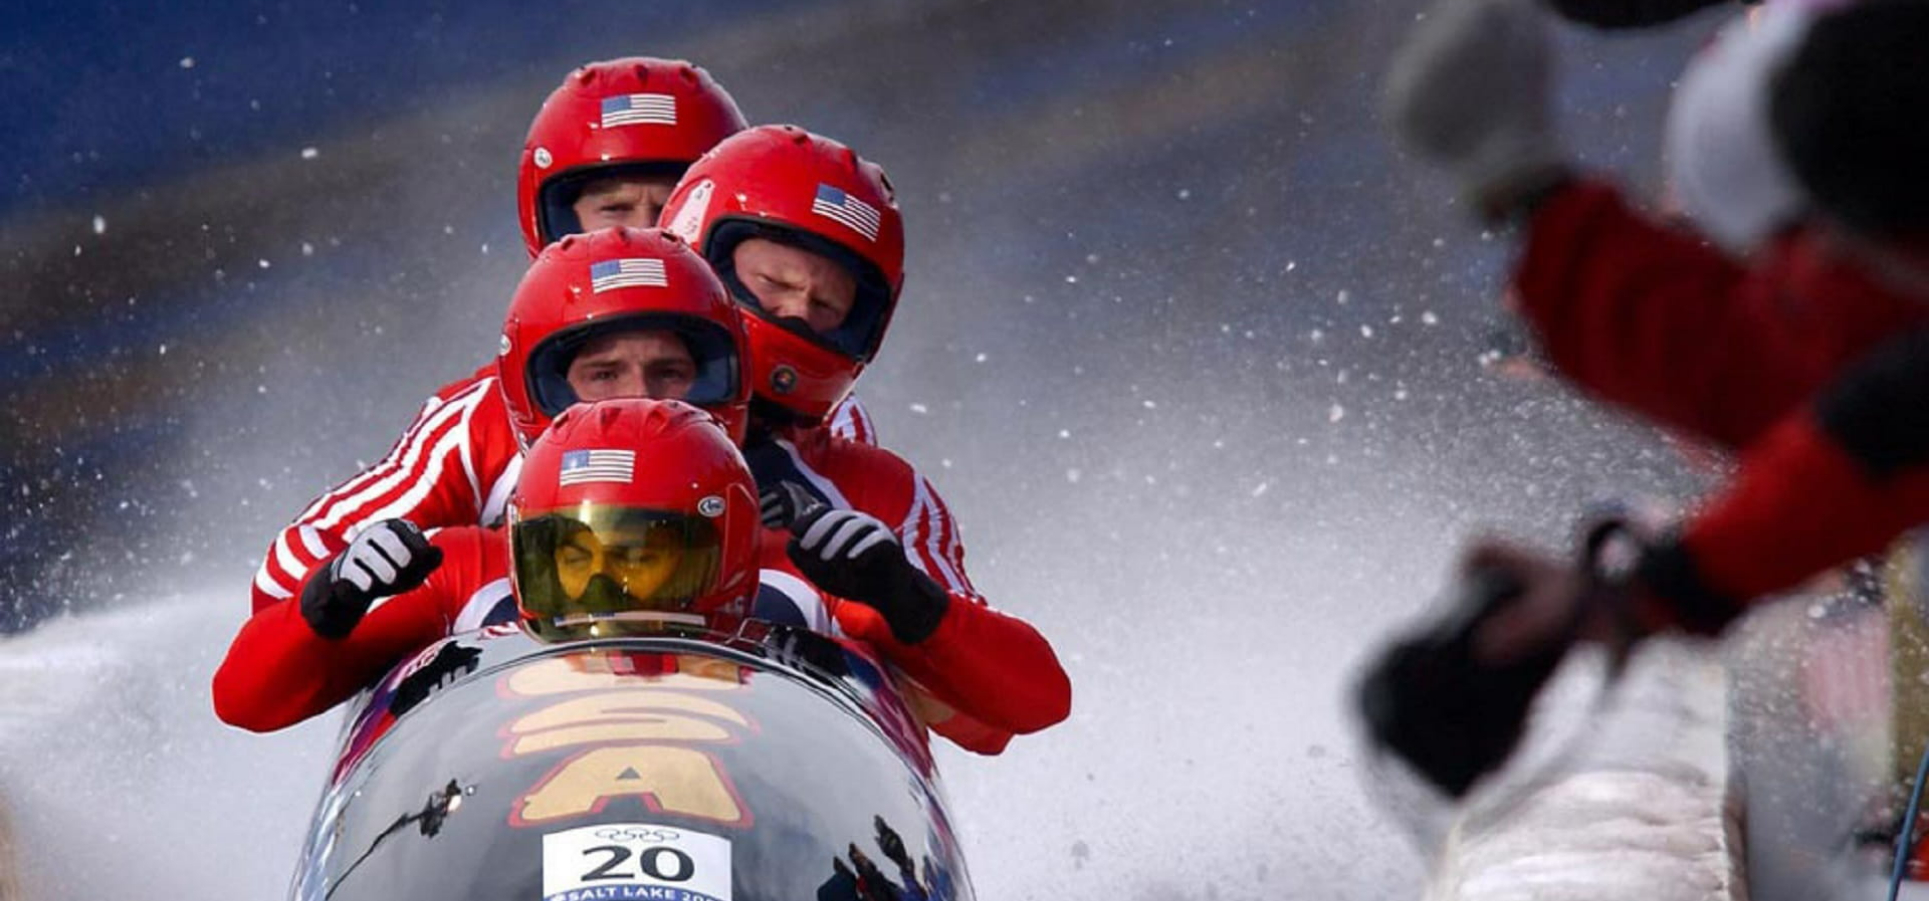 From St. Moritz Streets to Olympic Glory: The Journey of Bobsleigh